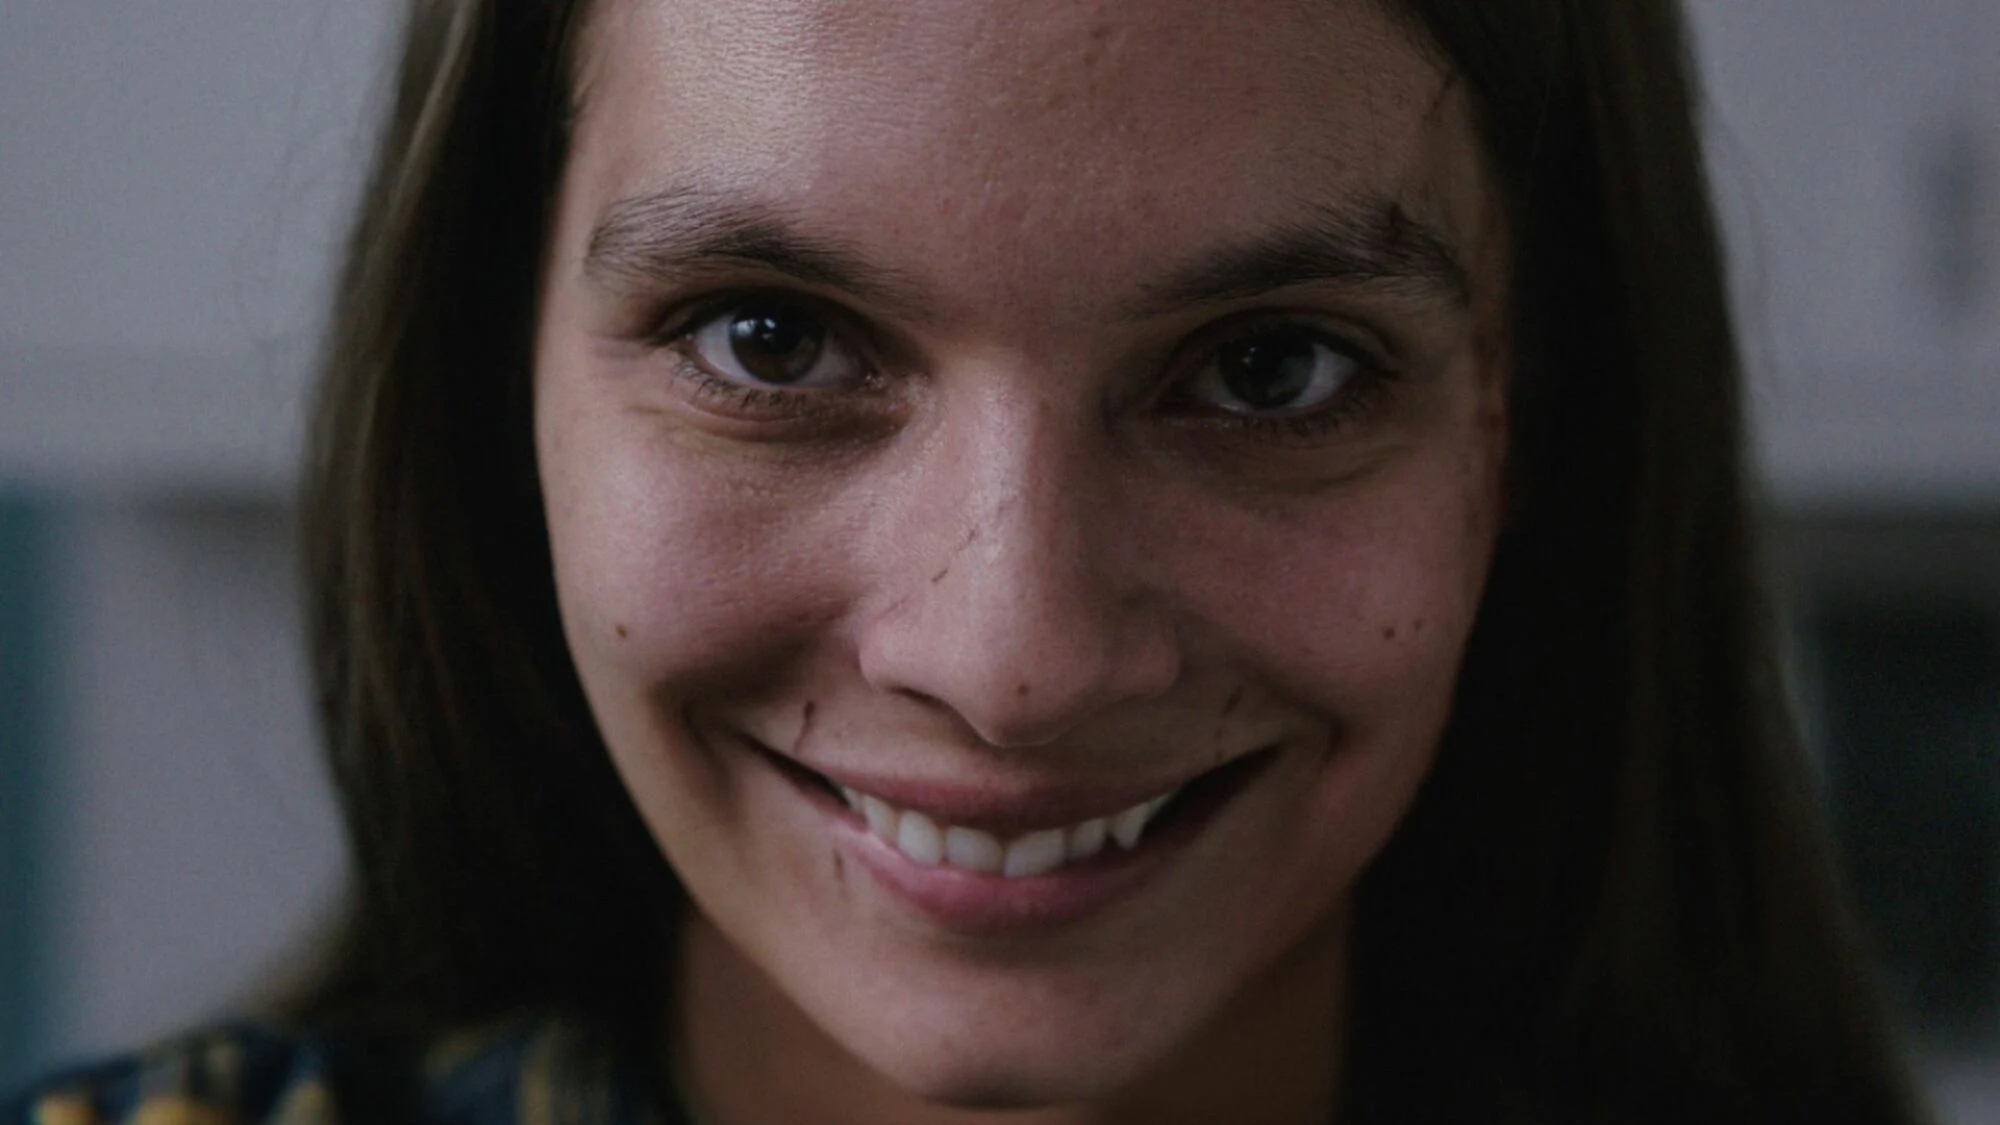 A creepily smiling girl in close-up.